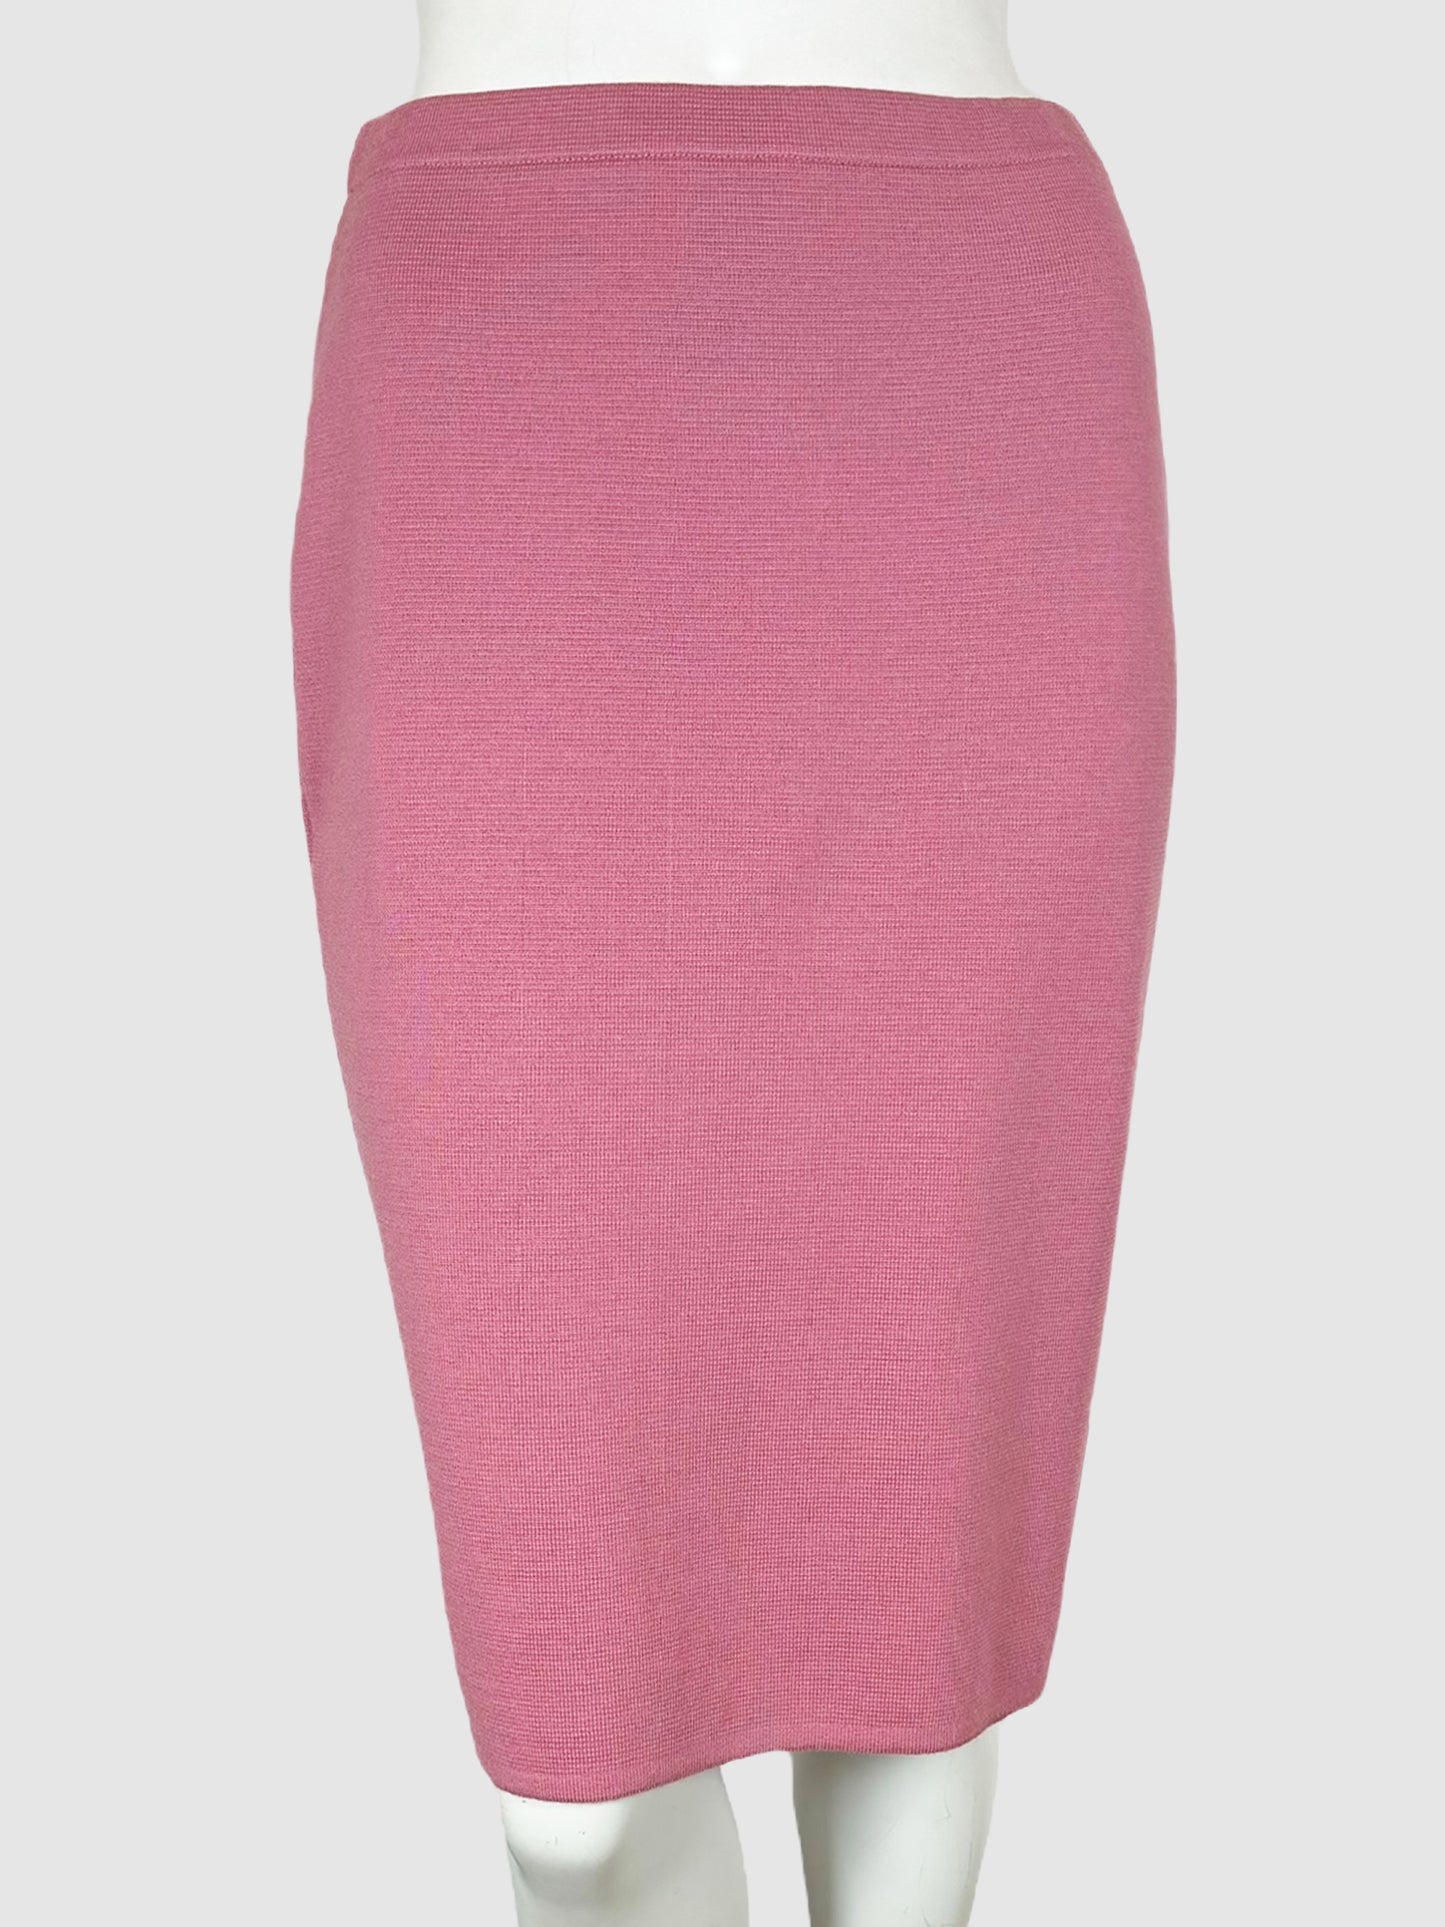 Ribbed Pencil Skirt - Size 44